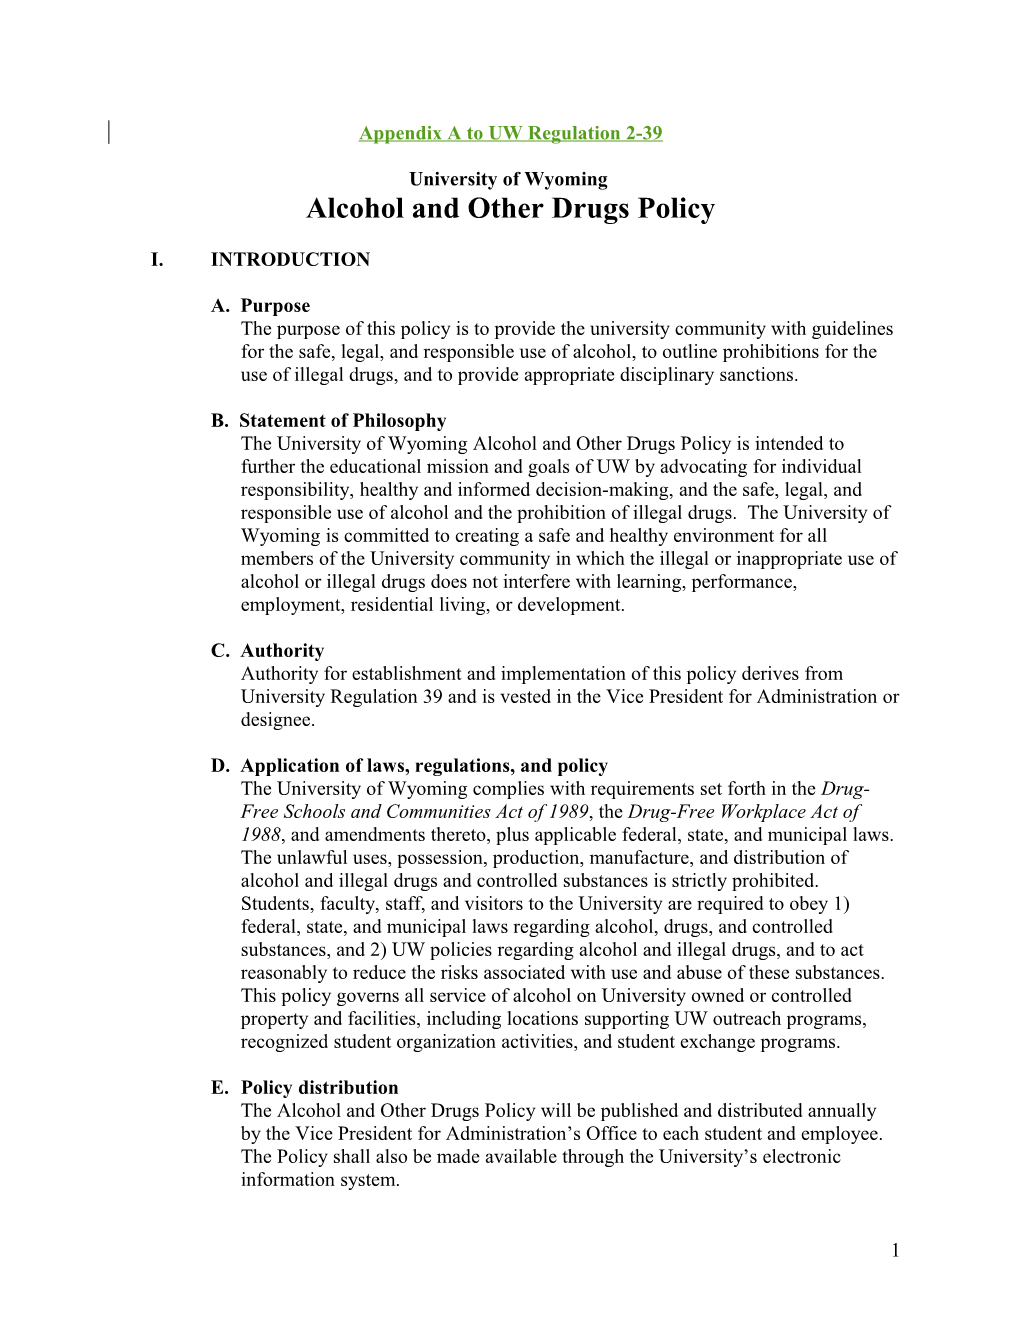 University Of Wyoming Alcohol Policy DRAFT 11